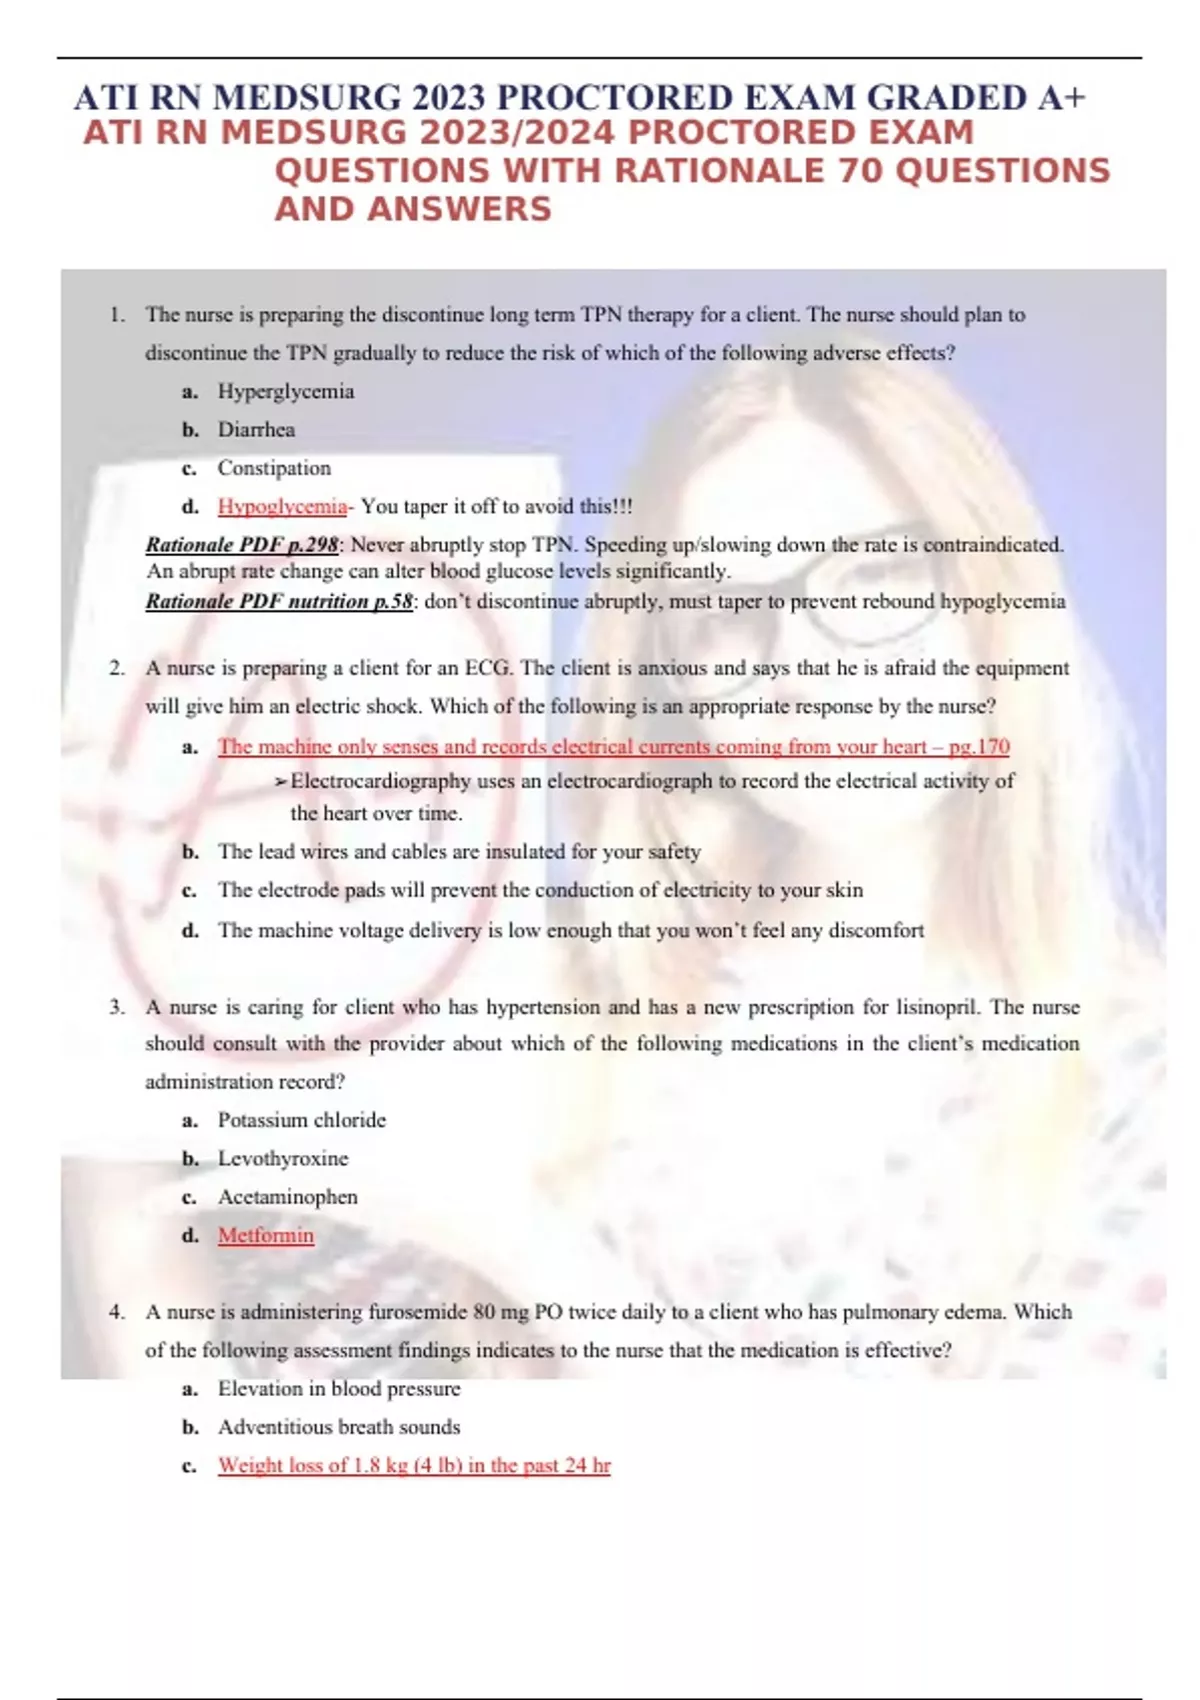 ATI RN MEDSURG 2023/2024 PROCTORED EXAM QUESTIONS WITH RATIONALE 70